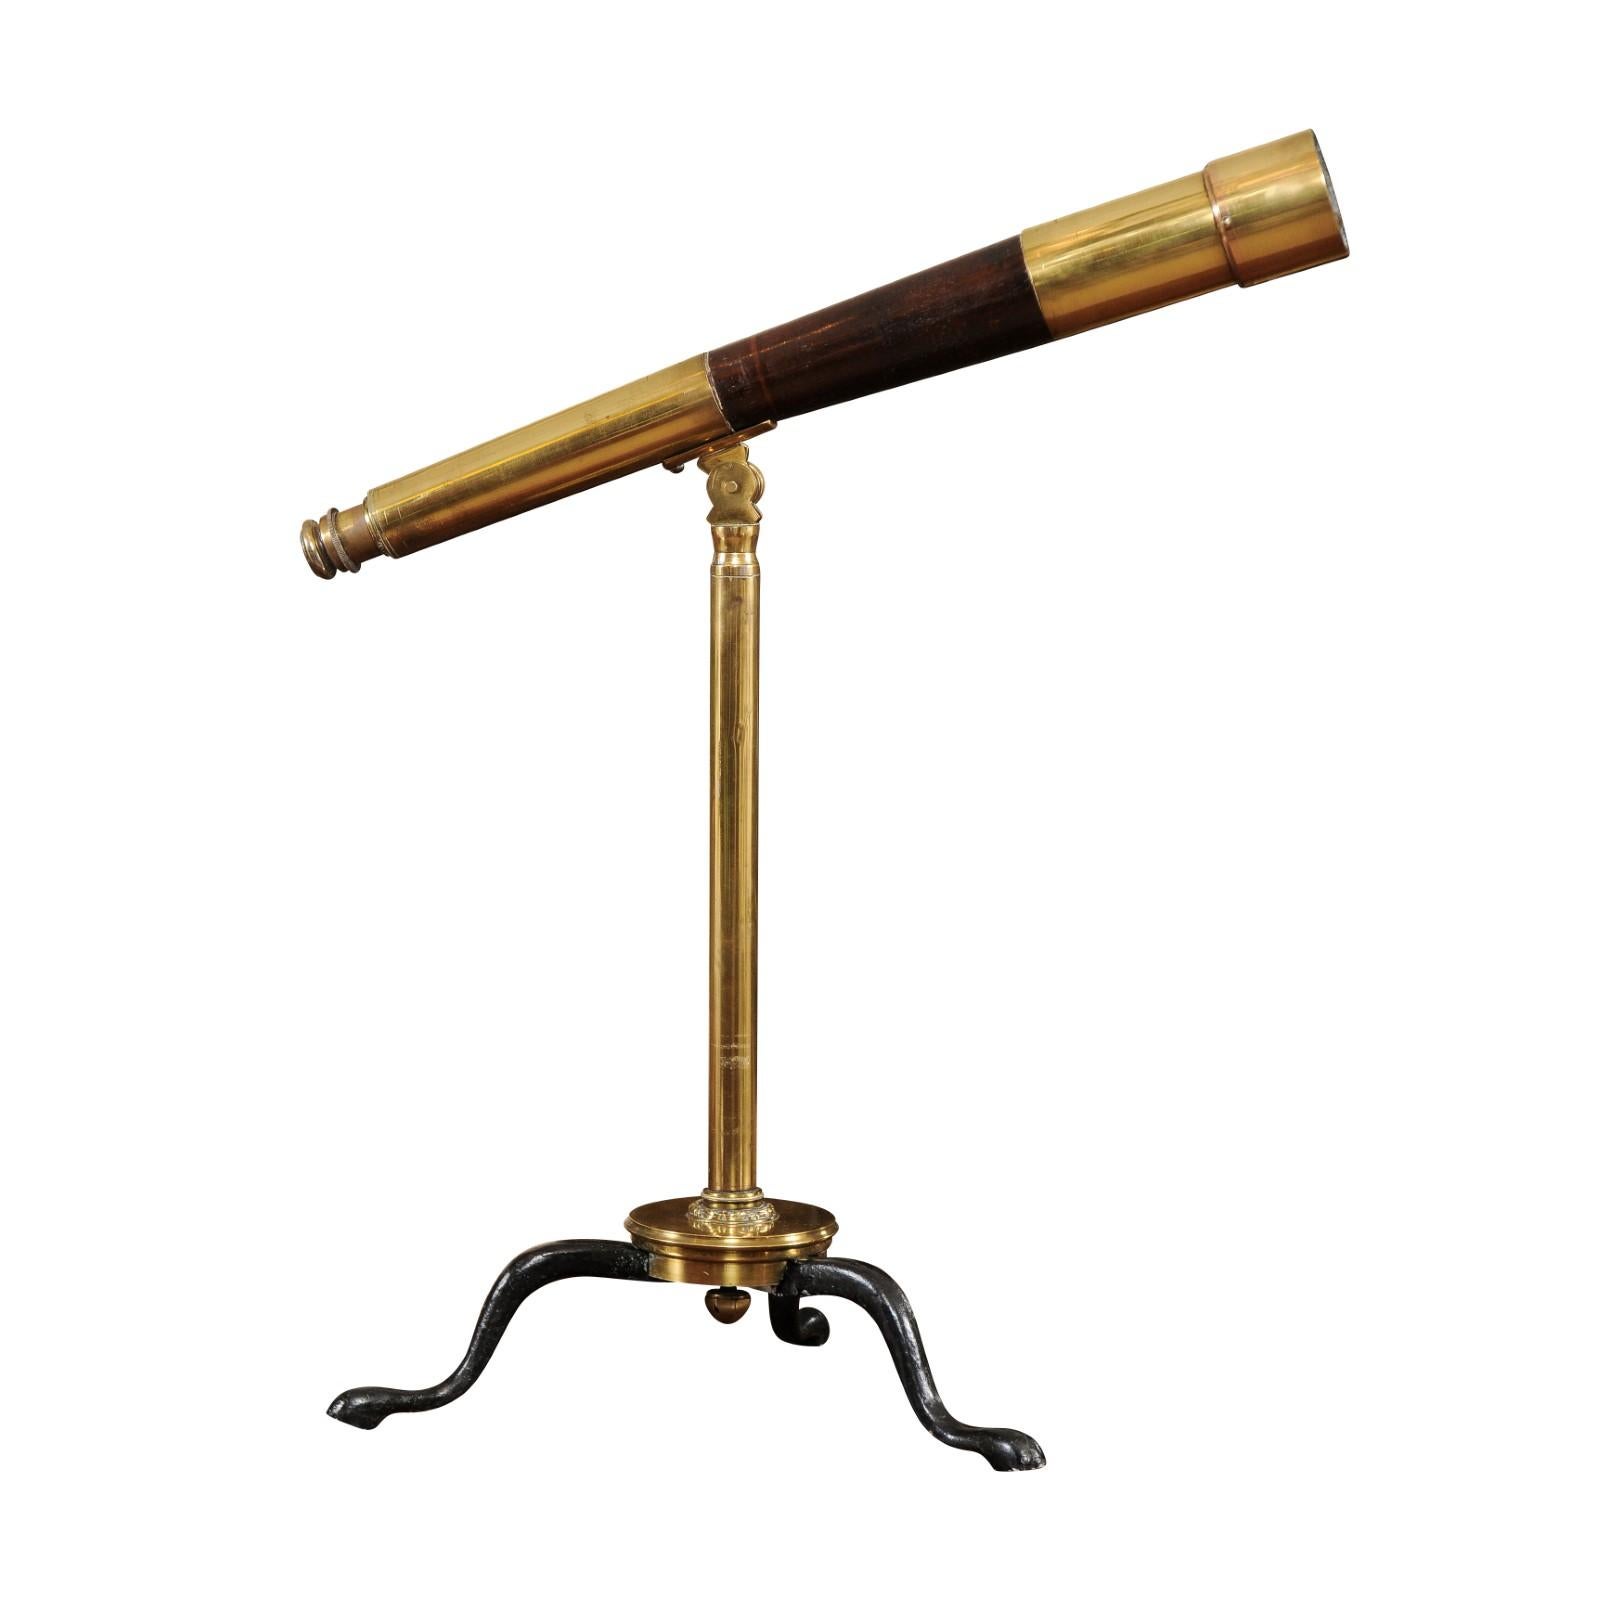 Ross of London Brass & Leather Telescope on Tripod Stand, Early 20th Century